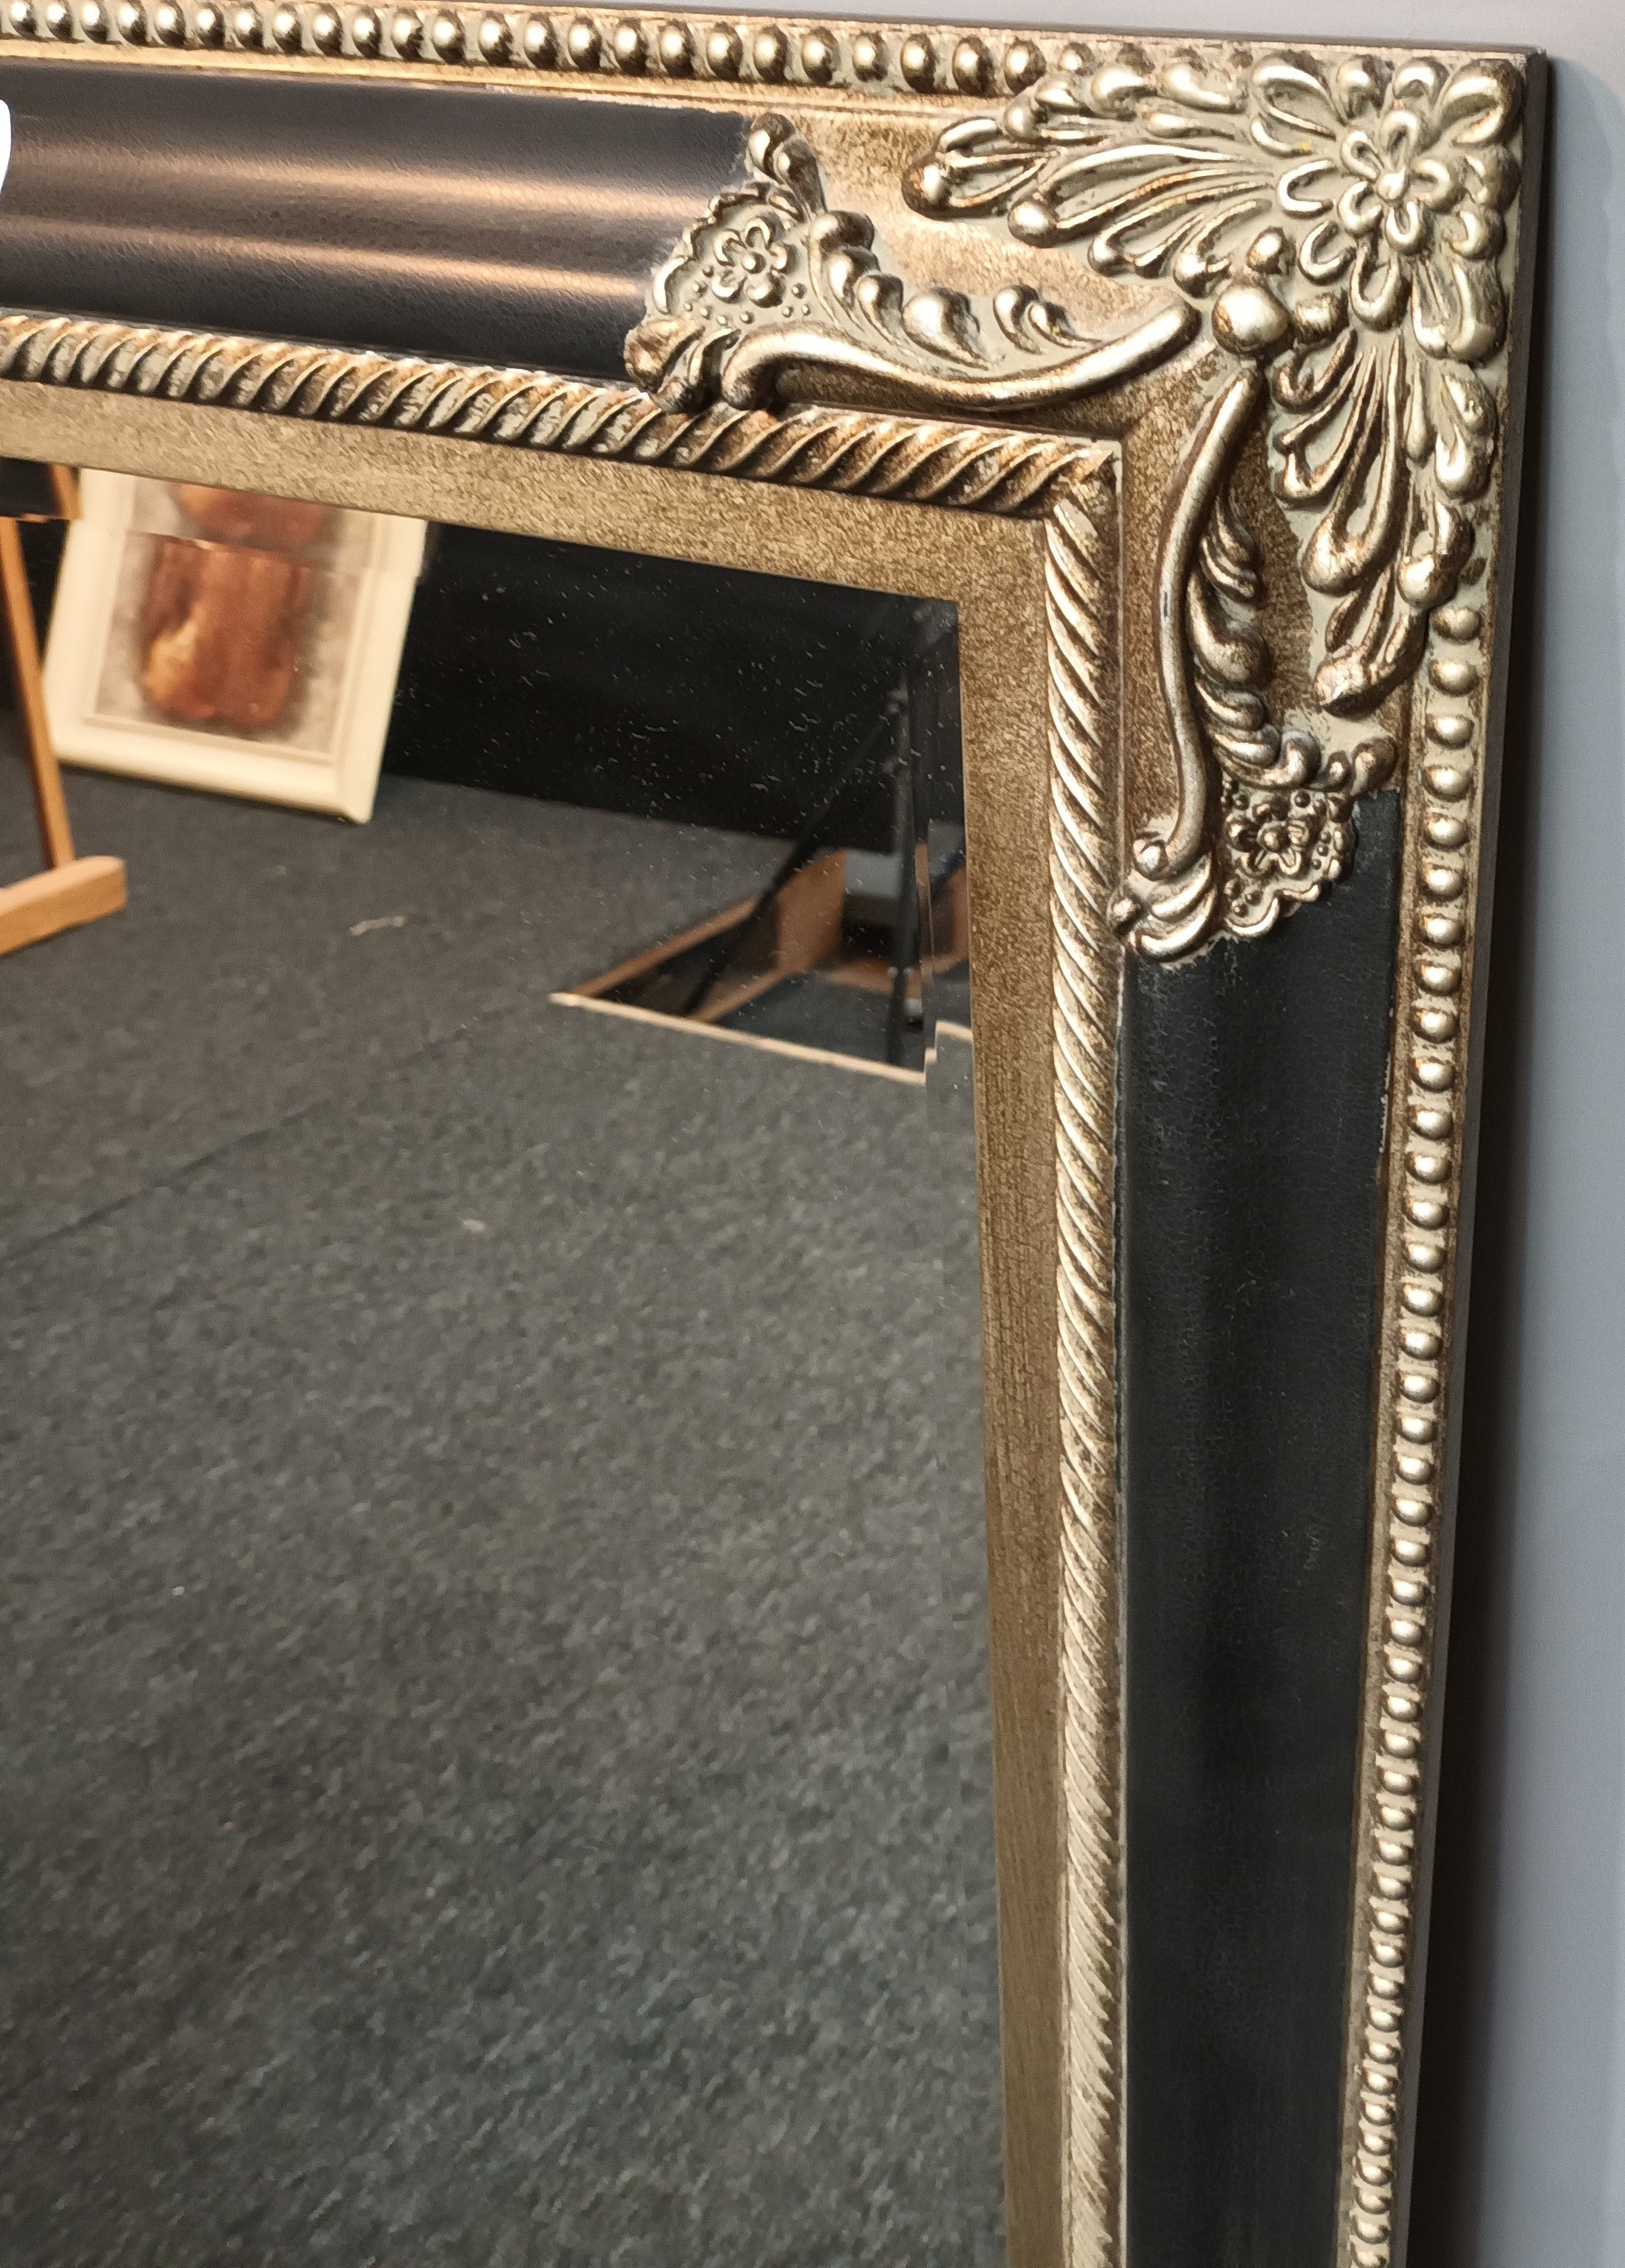 Decorative carved mirror [95x69cm] - Image 2 of 3